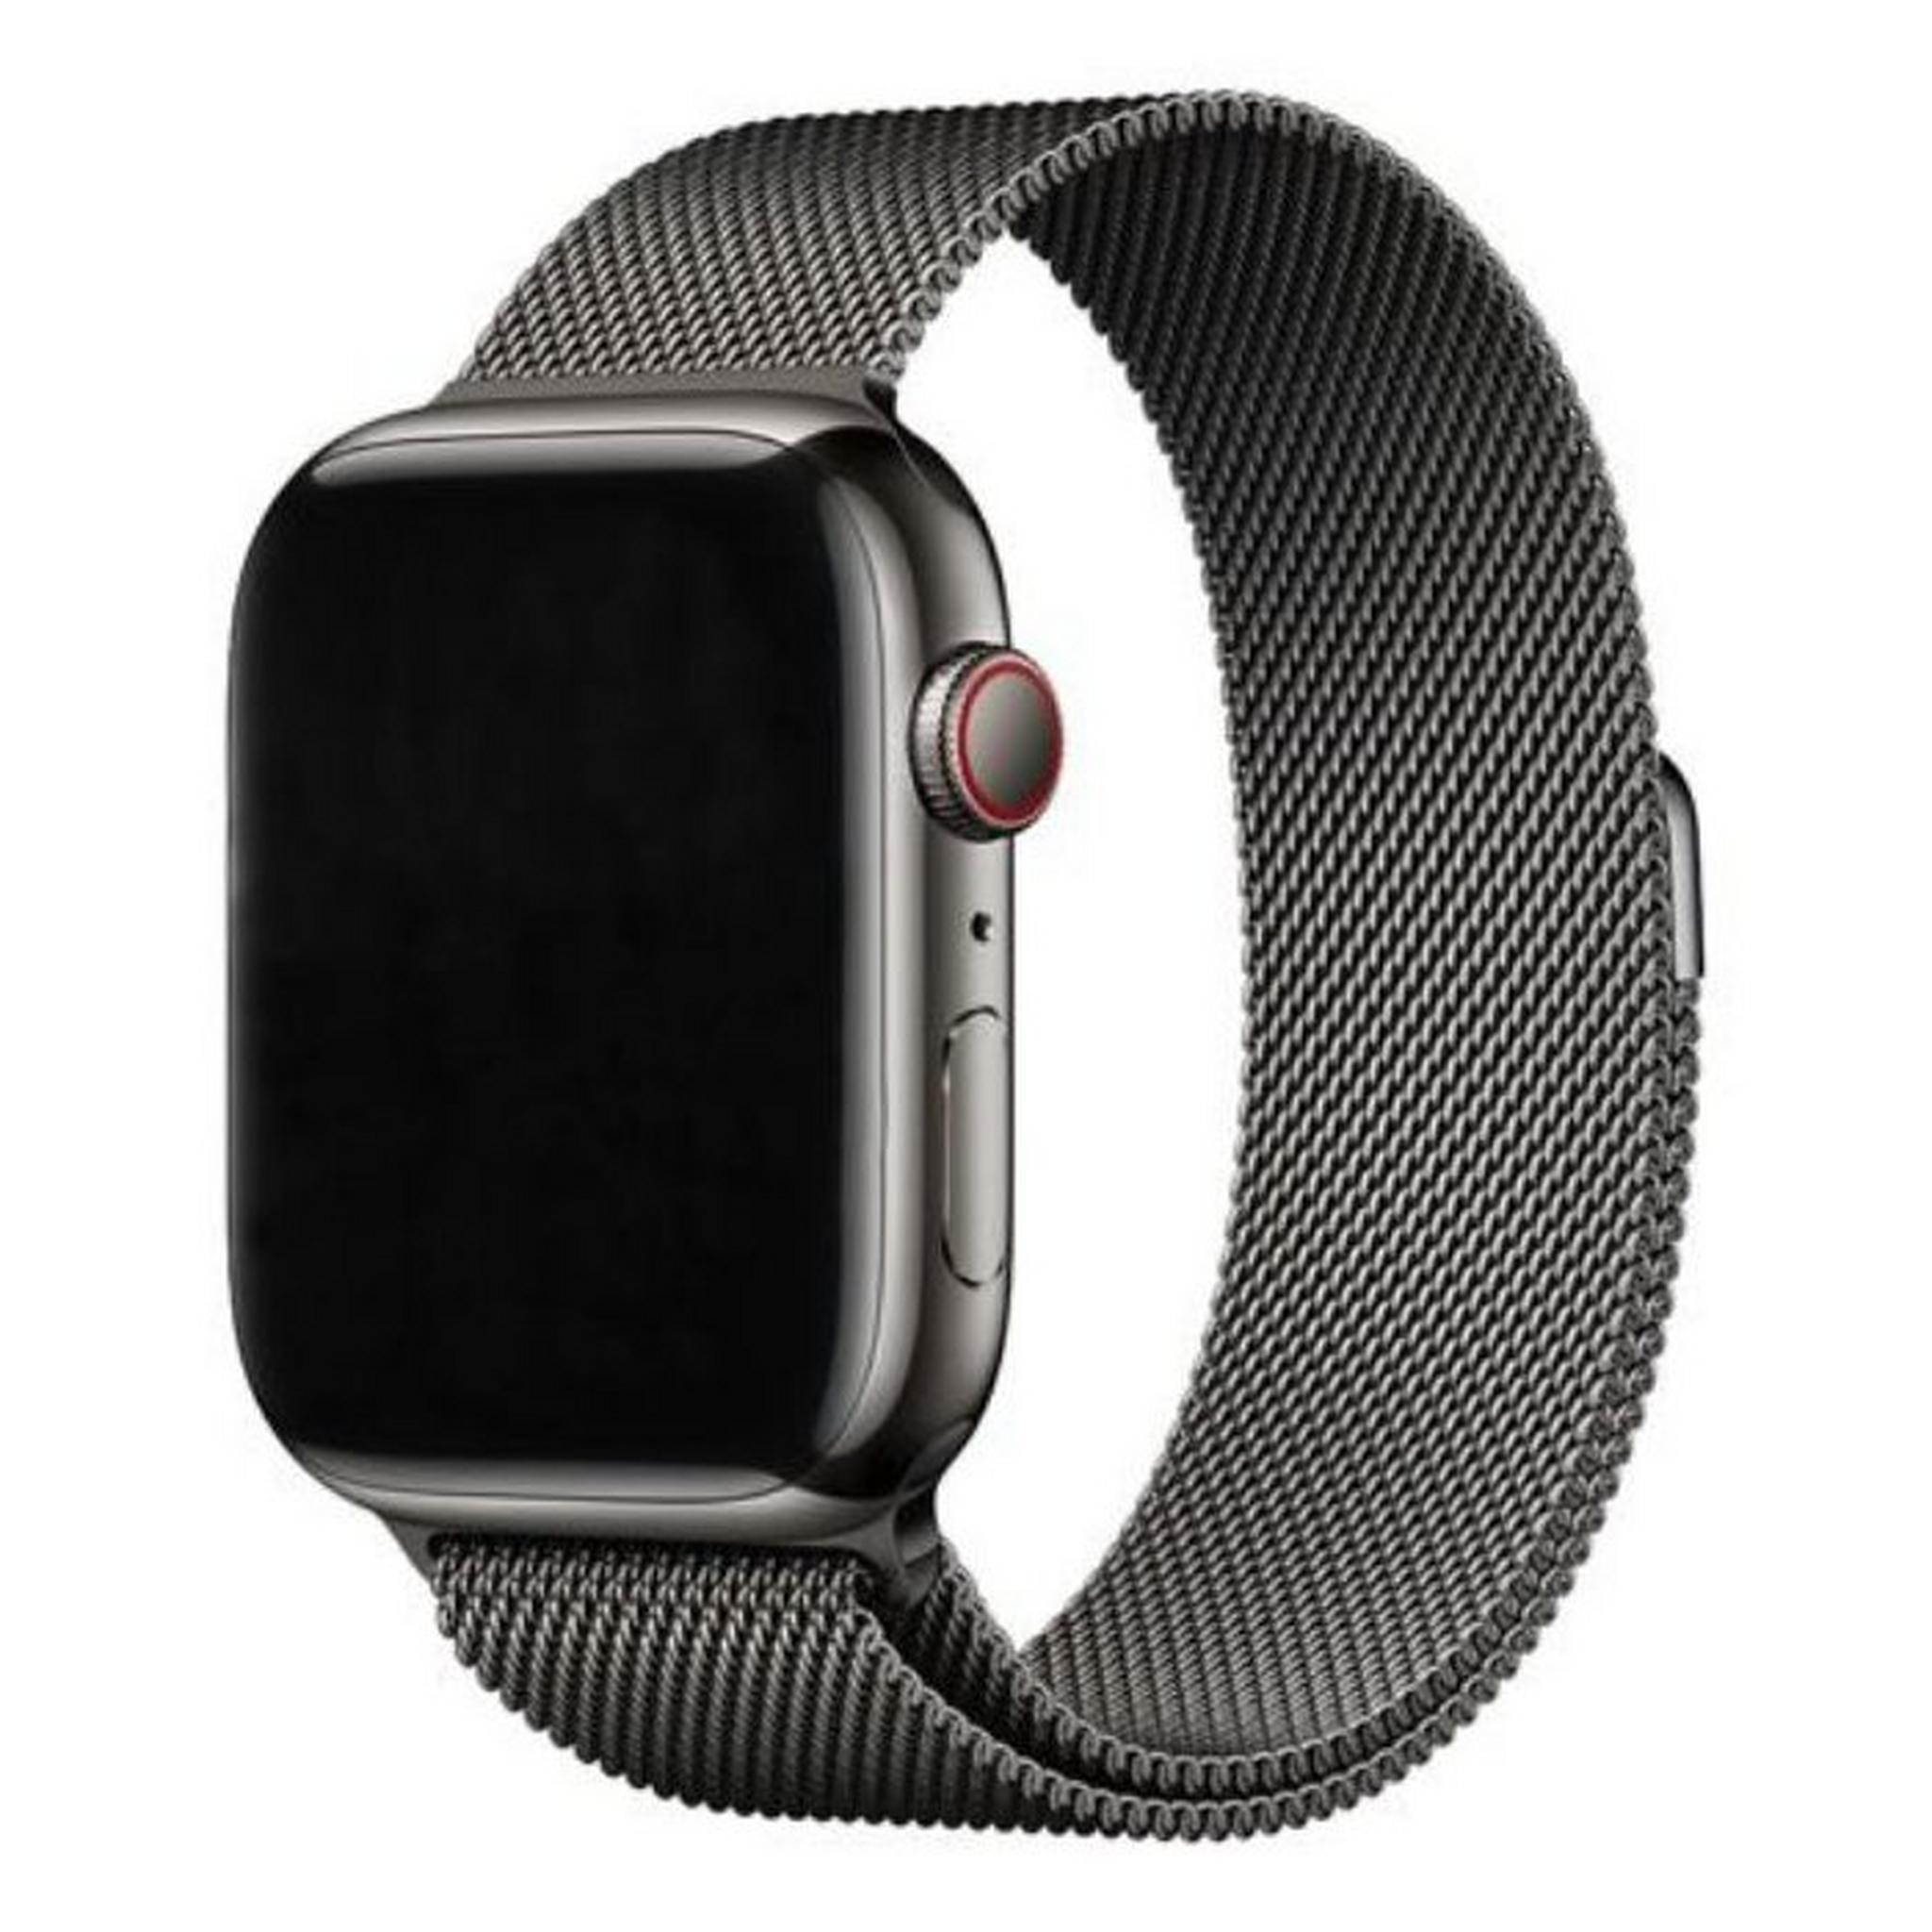 DECODED Apple Watch Band, 45MM, D23AWS45MTS1BK - Black